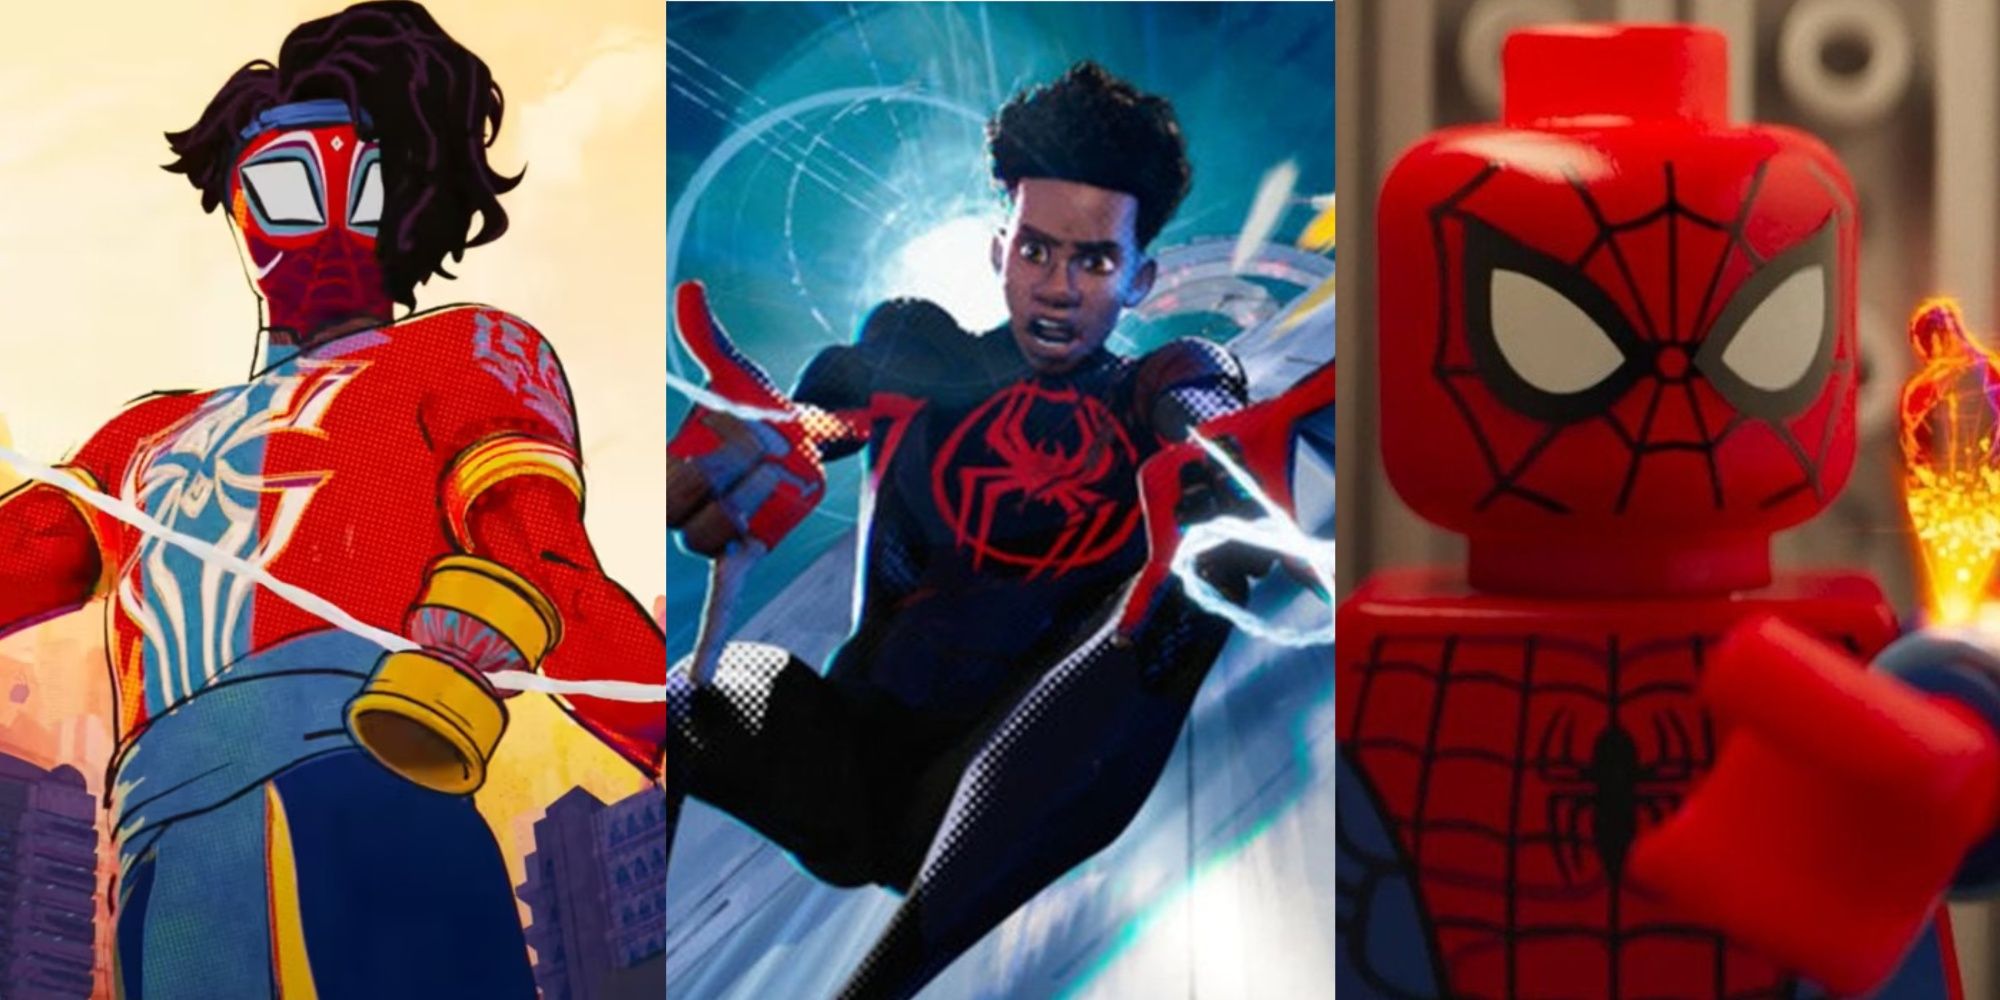 Spider-Man: Across the Spider-Verse New Character Guide